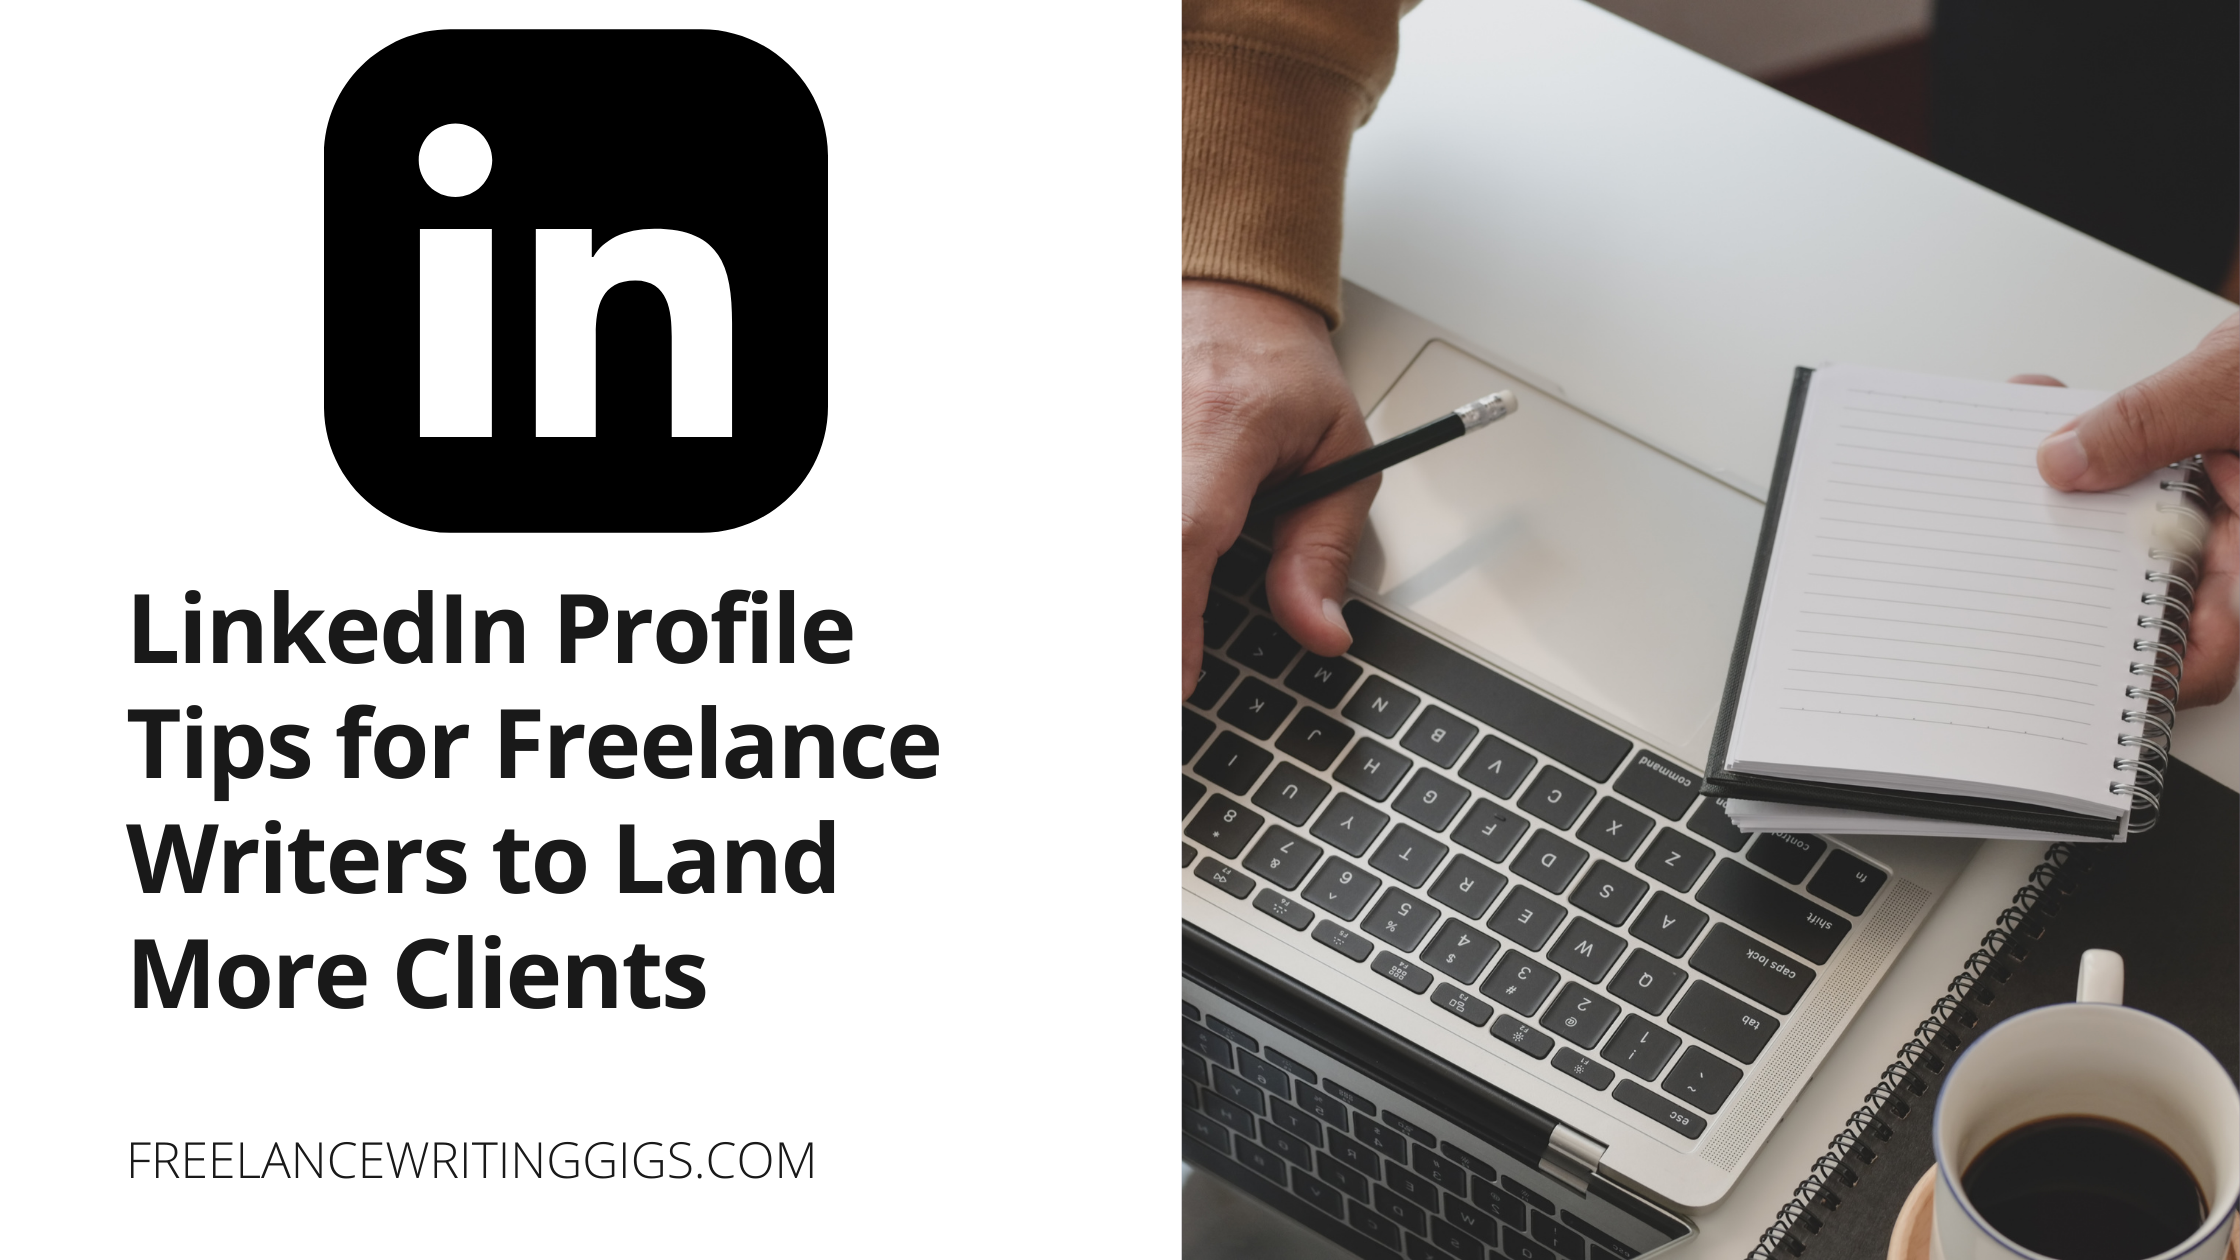 5 LinkedIn Profile Tips for Freelance Writers to Land More Clients